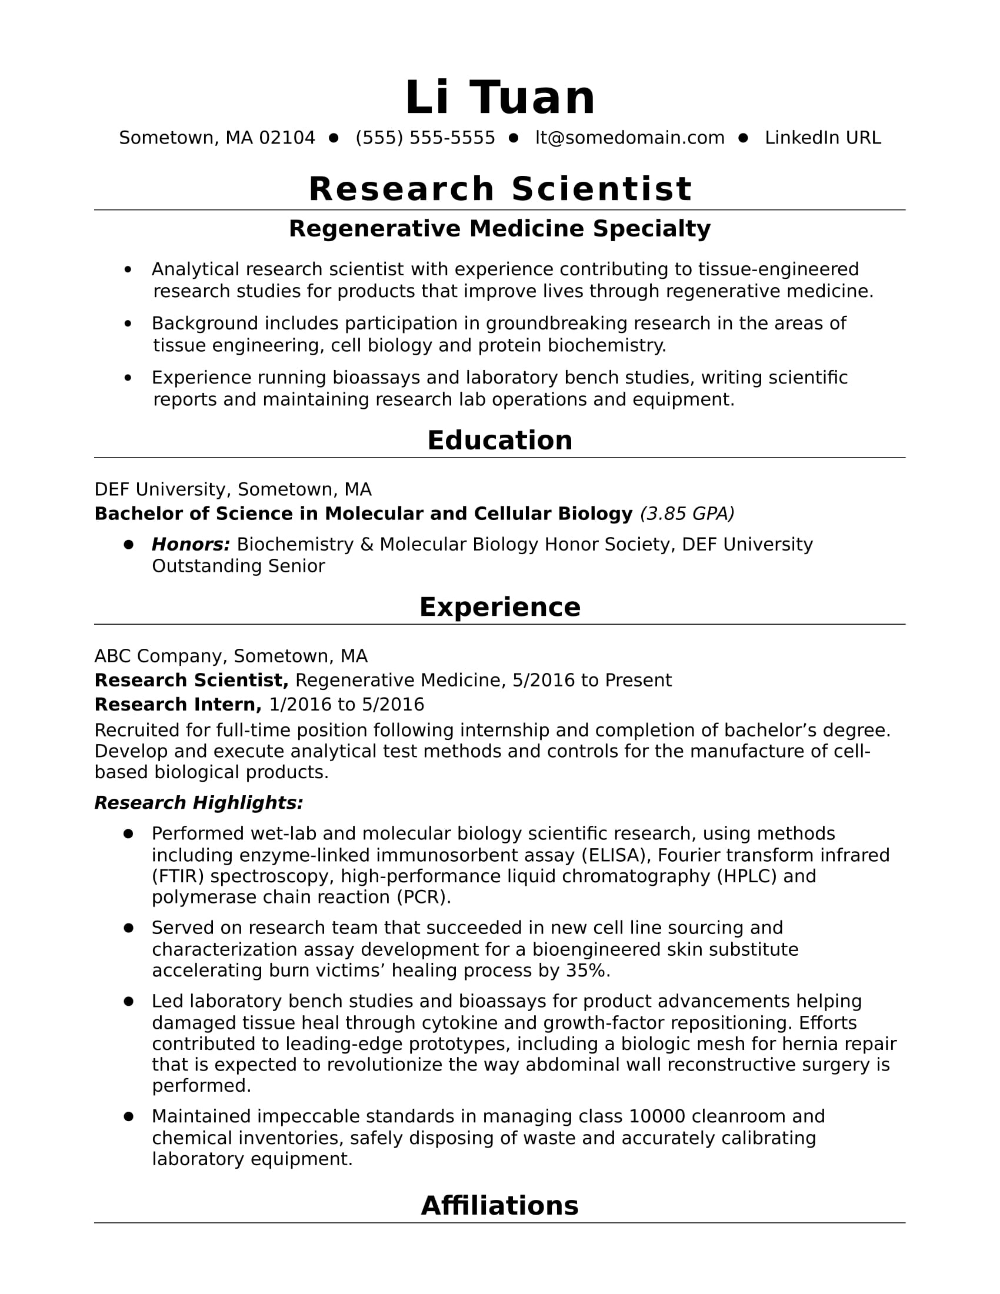 This sample resume for an entry